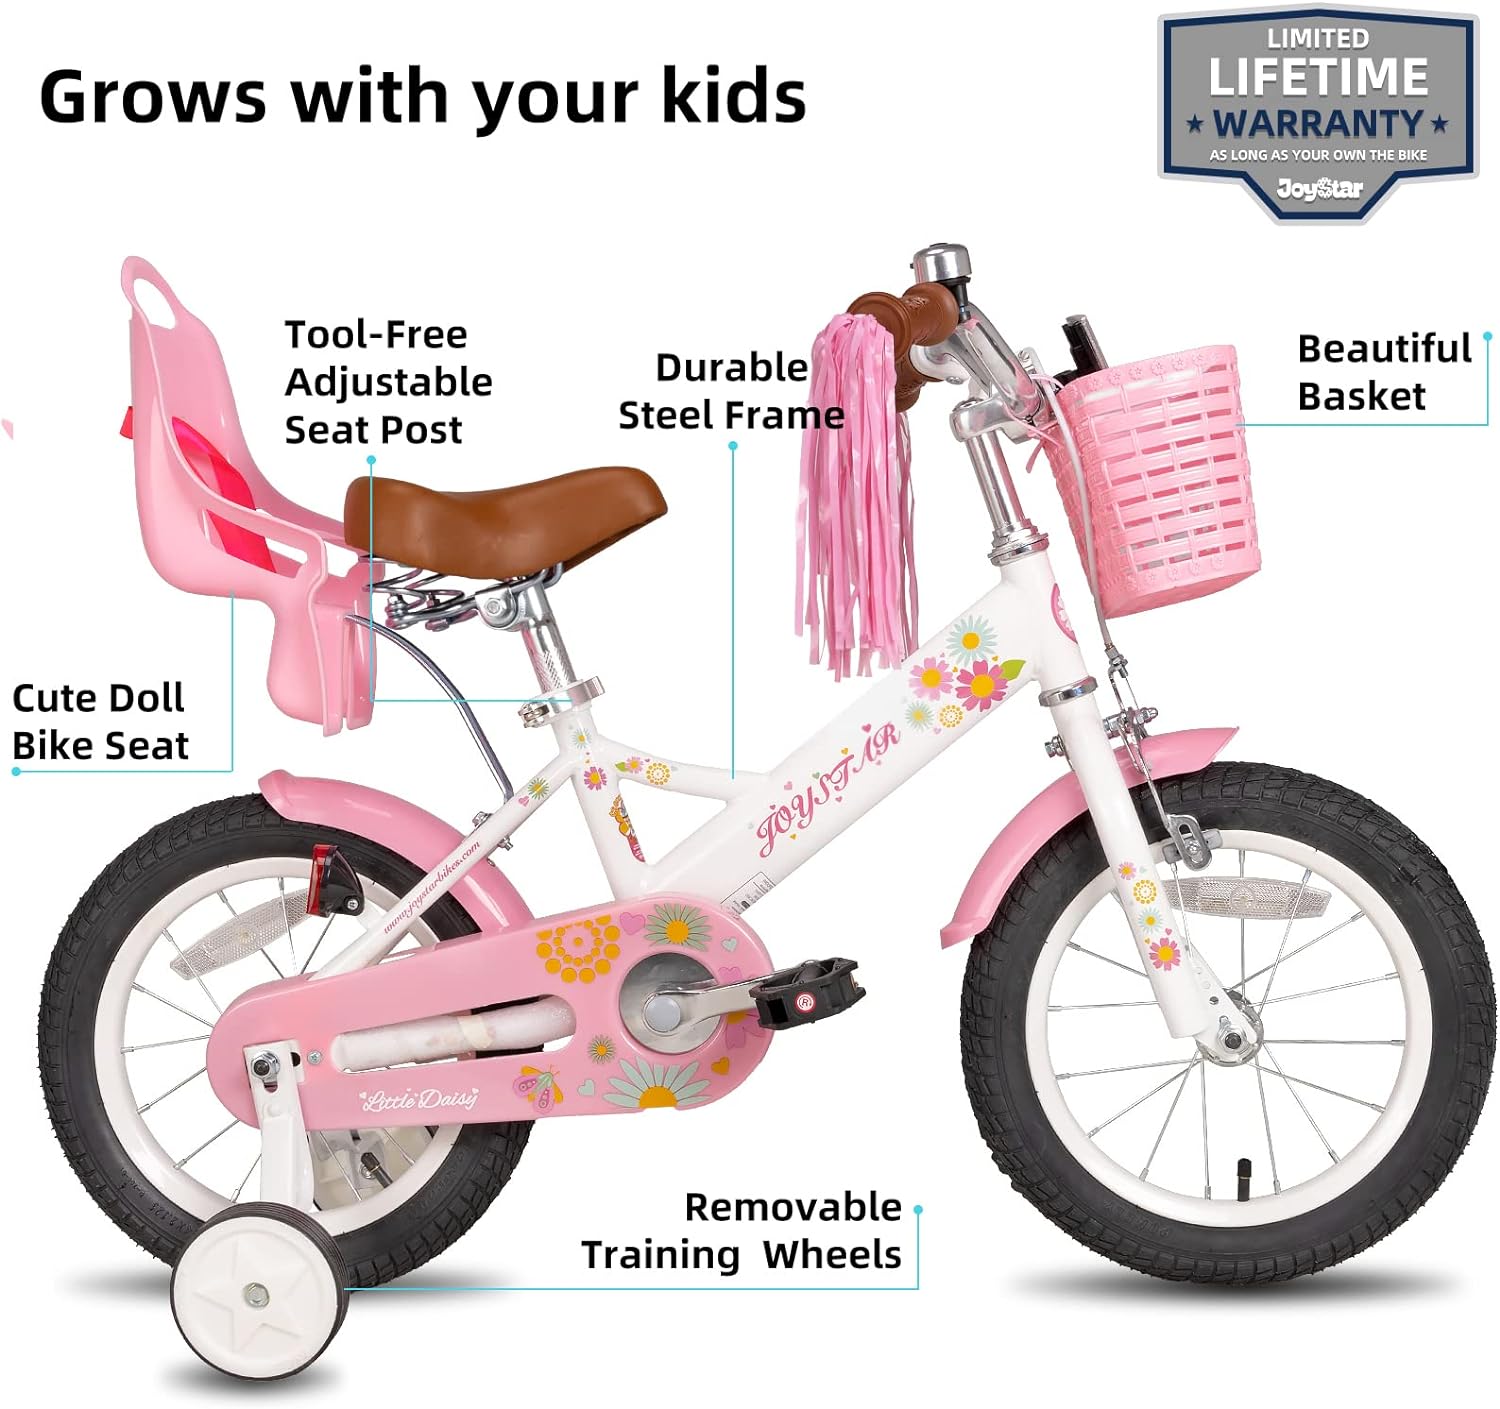 JOYSTAR Little Daisy Kids Bike for Girls Ages 2-12 Years, 12 14 16 20 Inch Princess Girls Bicycle with Doll Bike Seat, Training Wheels, Basket and Streamers, Kids Cycle Bikes, Multiple Colors